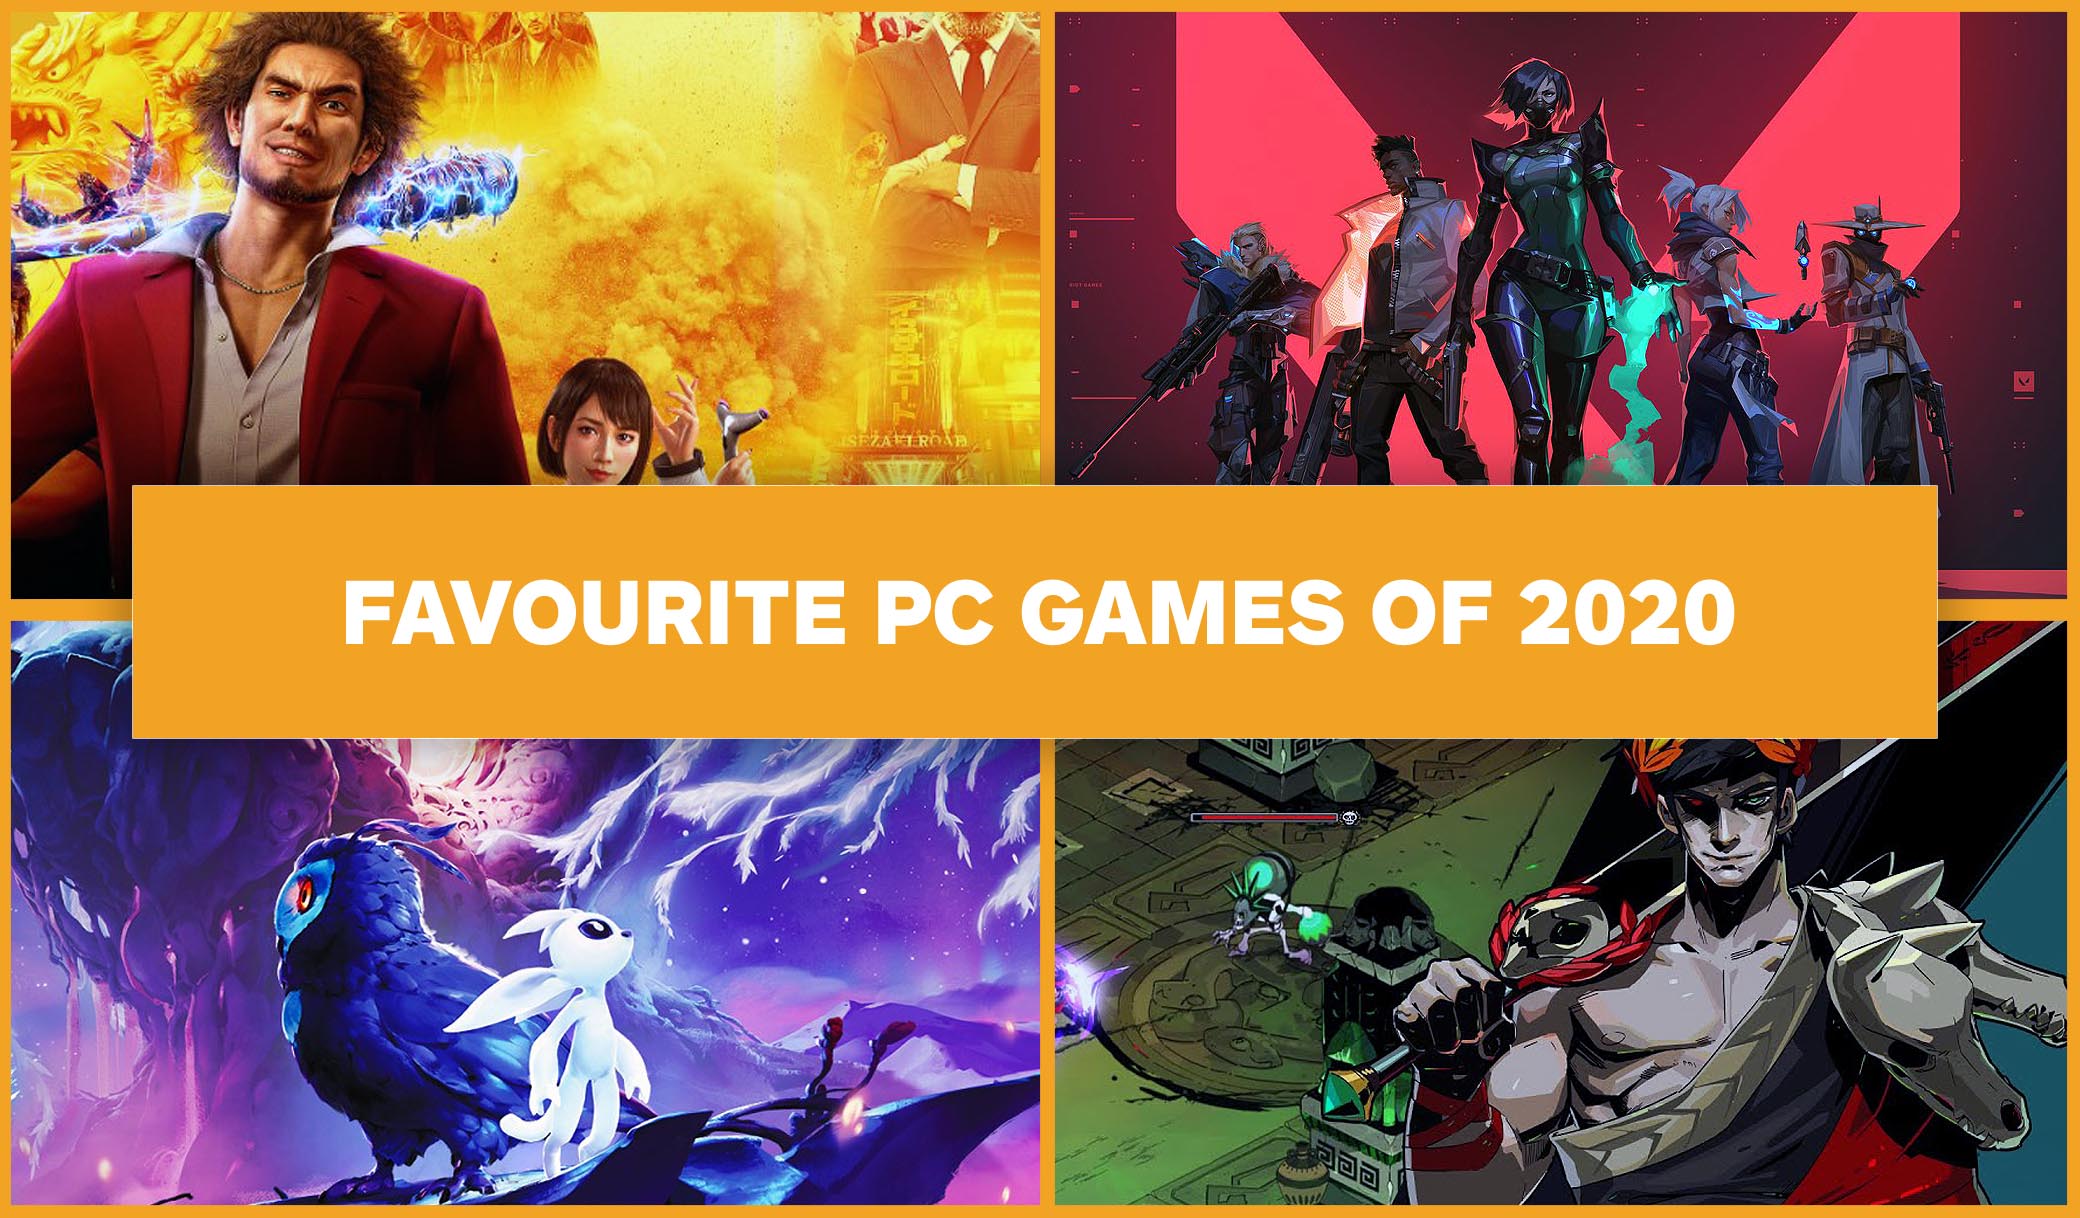 RPGFan Games of the Year 2020: Best RPG (or Adventure Game) of